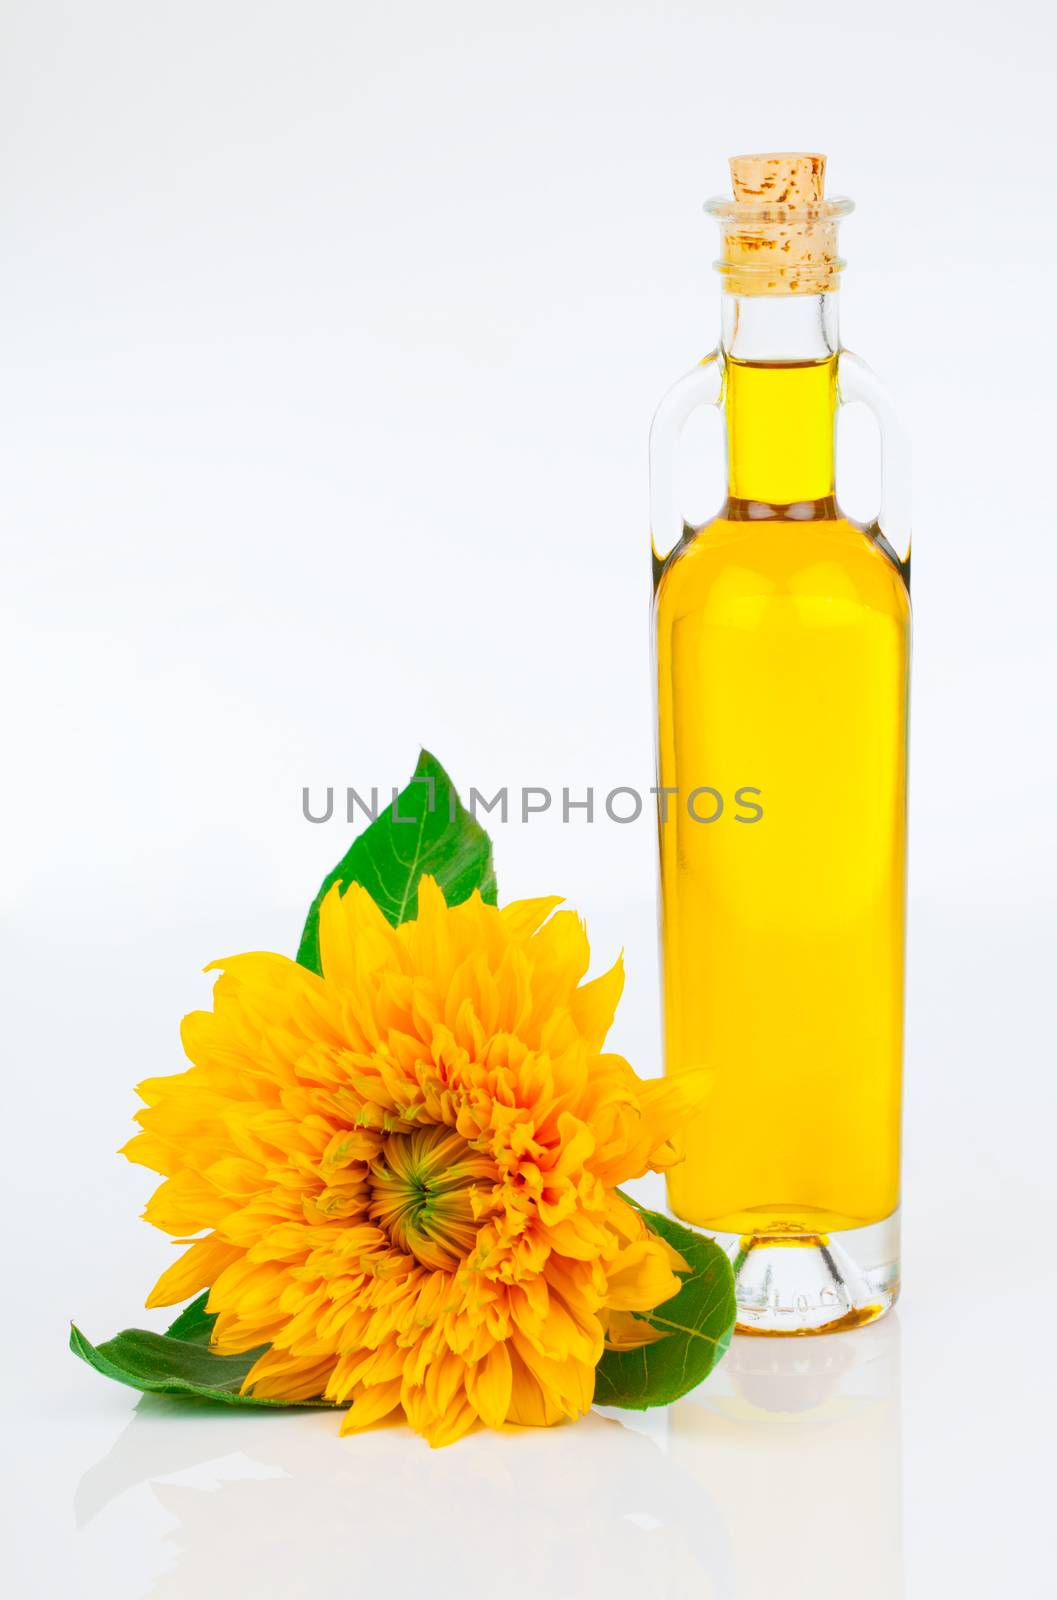 oil in glass bottle and sunflowers, isolated on white by motorolka